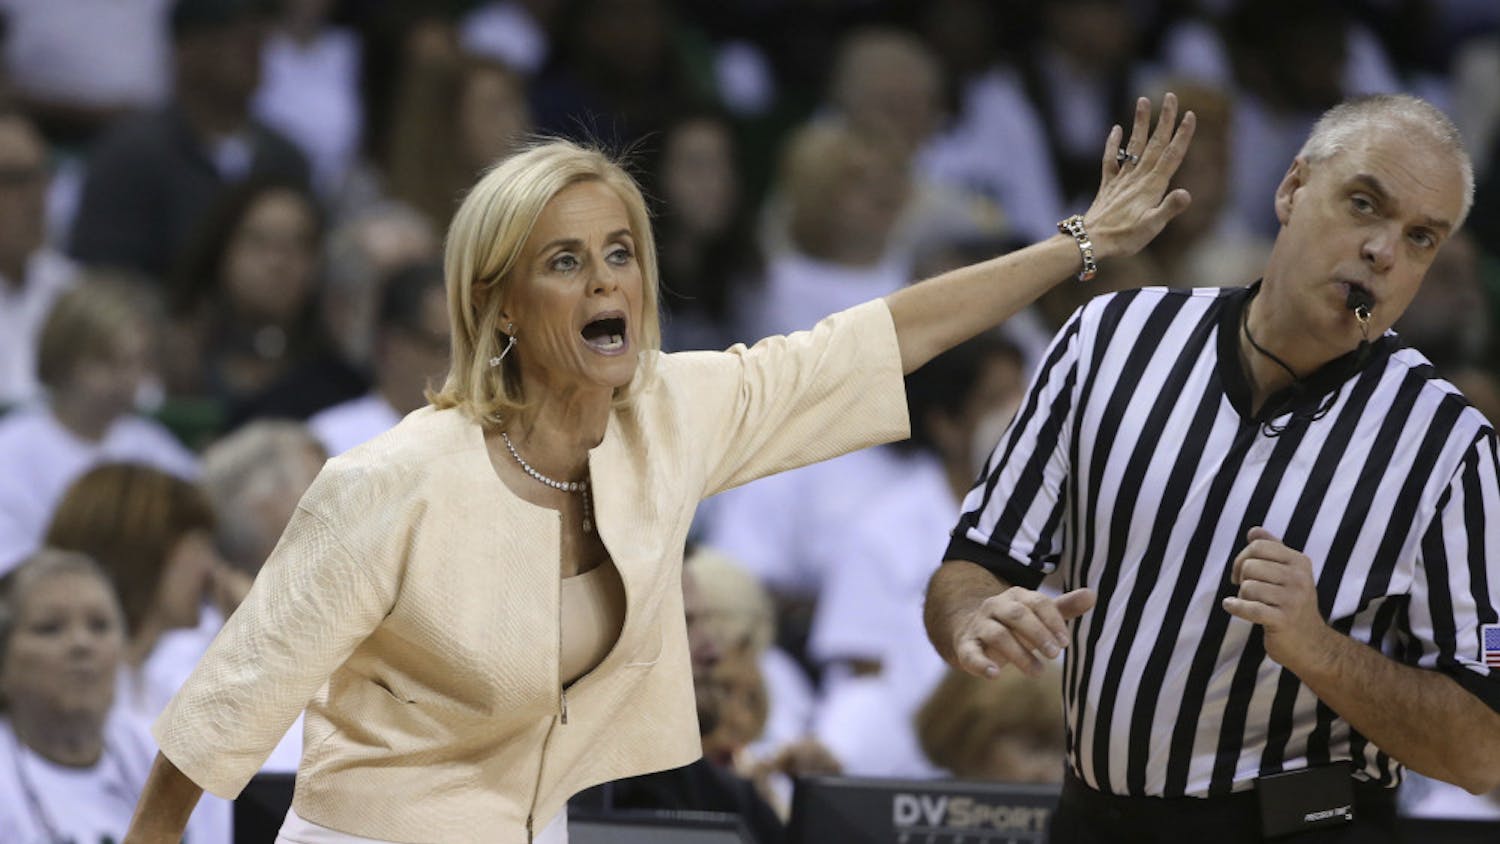 Baylor head women's coach Kim Mulkey calls in a play during the second half of an NCAA college basketball game against Texas Tech, Saturday, Feb. 25, 2017, in Waco, Texas. Baylor won 86-48. (AP Photo/Rod Aydelotte)